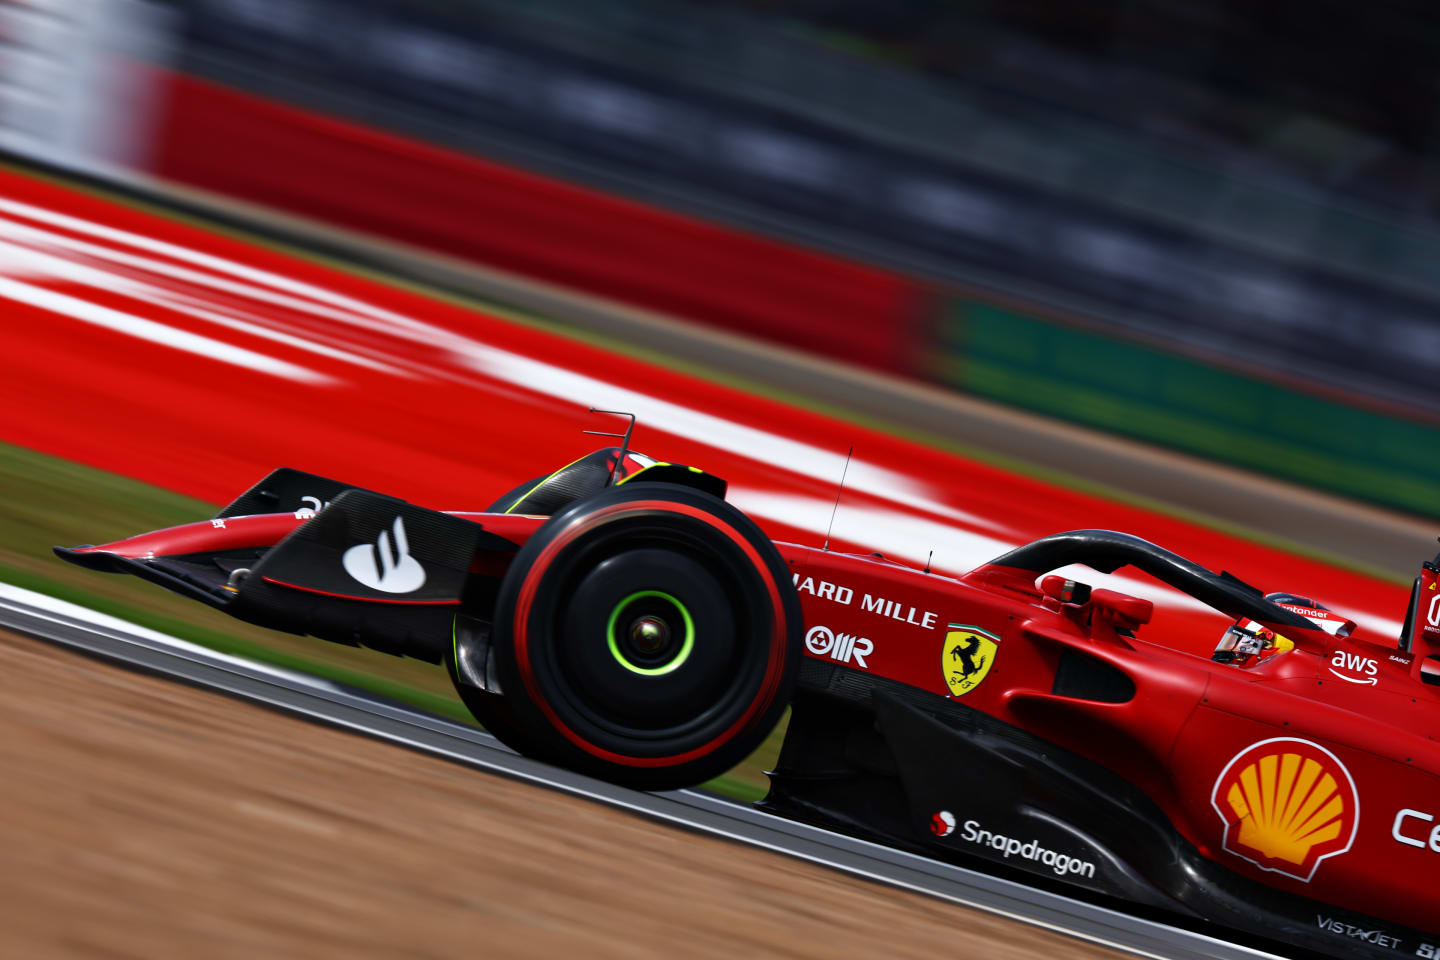 NORTHAMPTON, ENGLAND - JULY 01: Carlos Sainz of Spain driving (55) the Ferrari F1-75 on track during practice ahead of the F1 Grand Prix of Great Britain at Silverstone on July 01, 2022 in Northampton, England. (Photo by Mark Thompson/Getty Images)